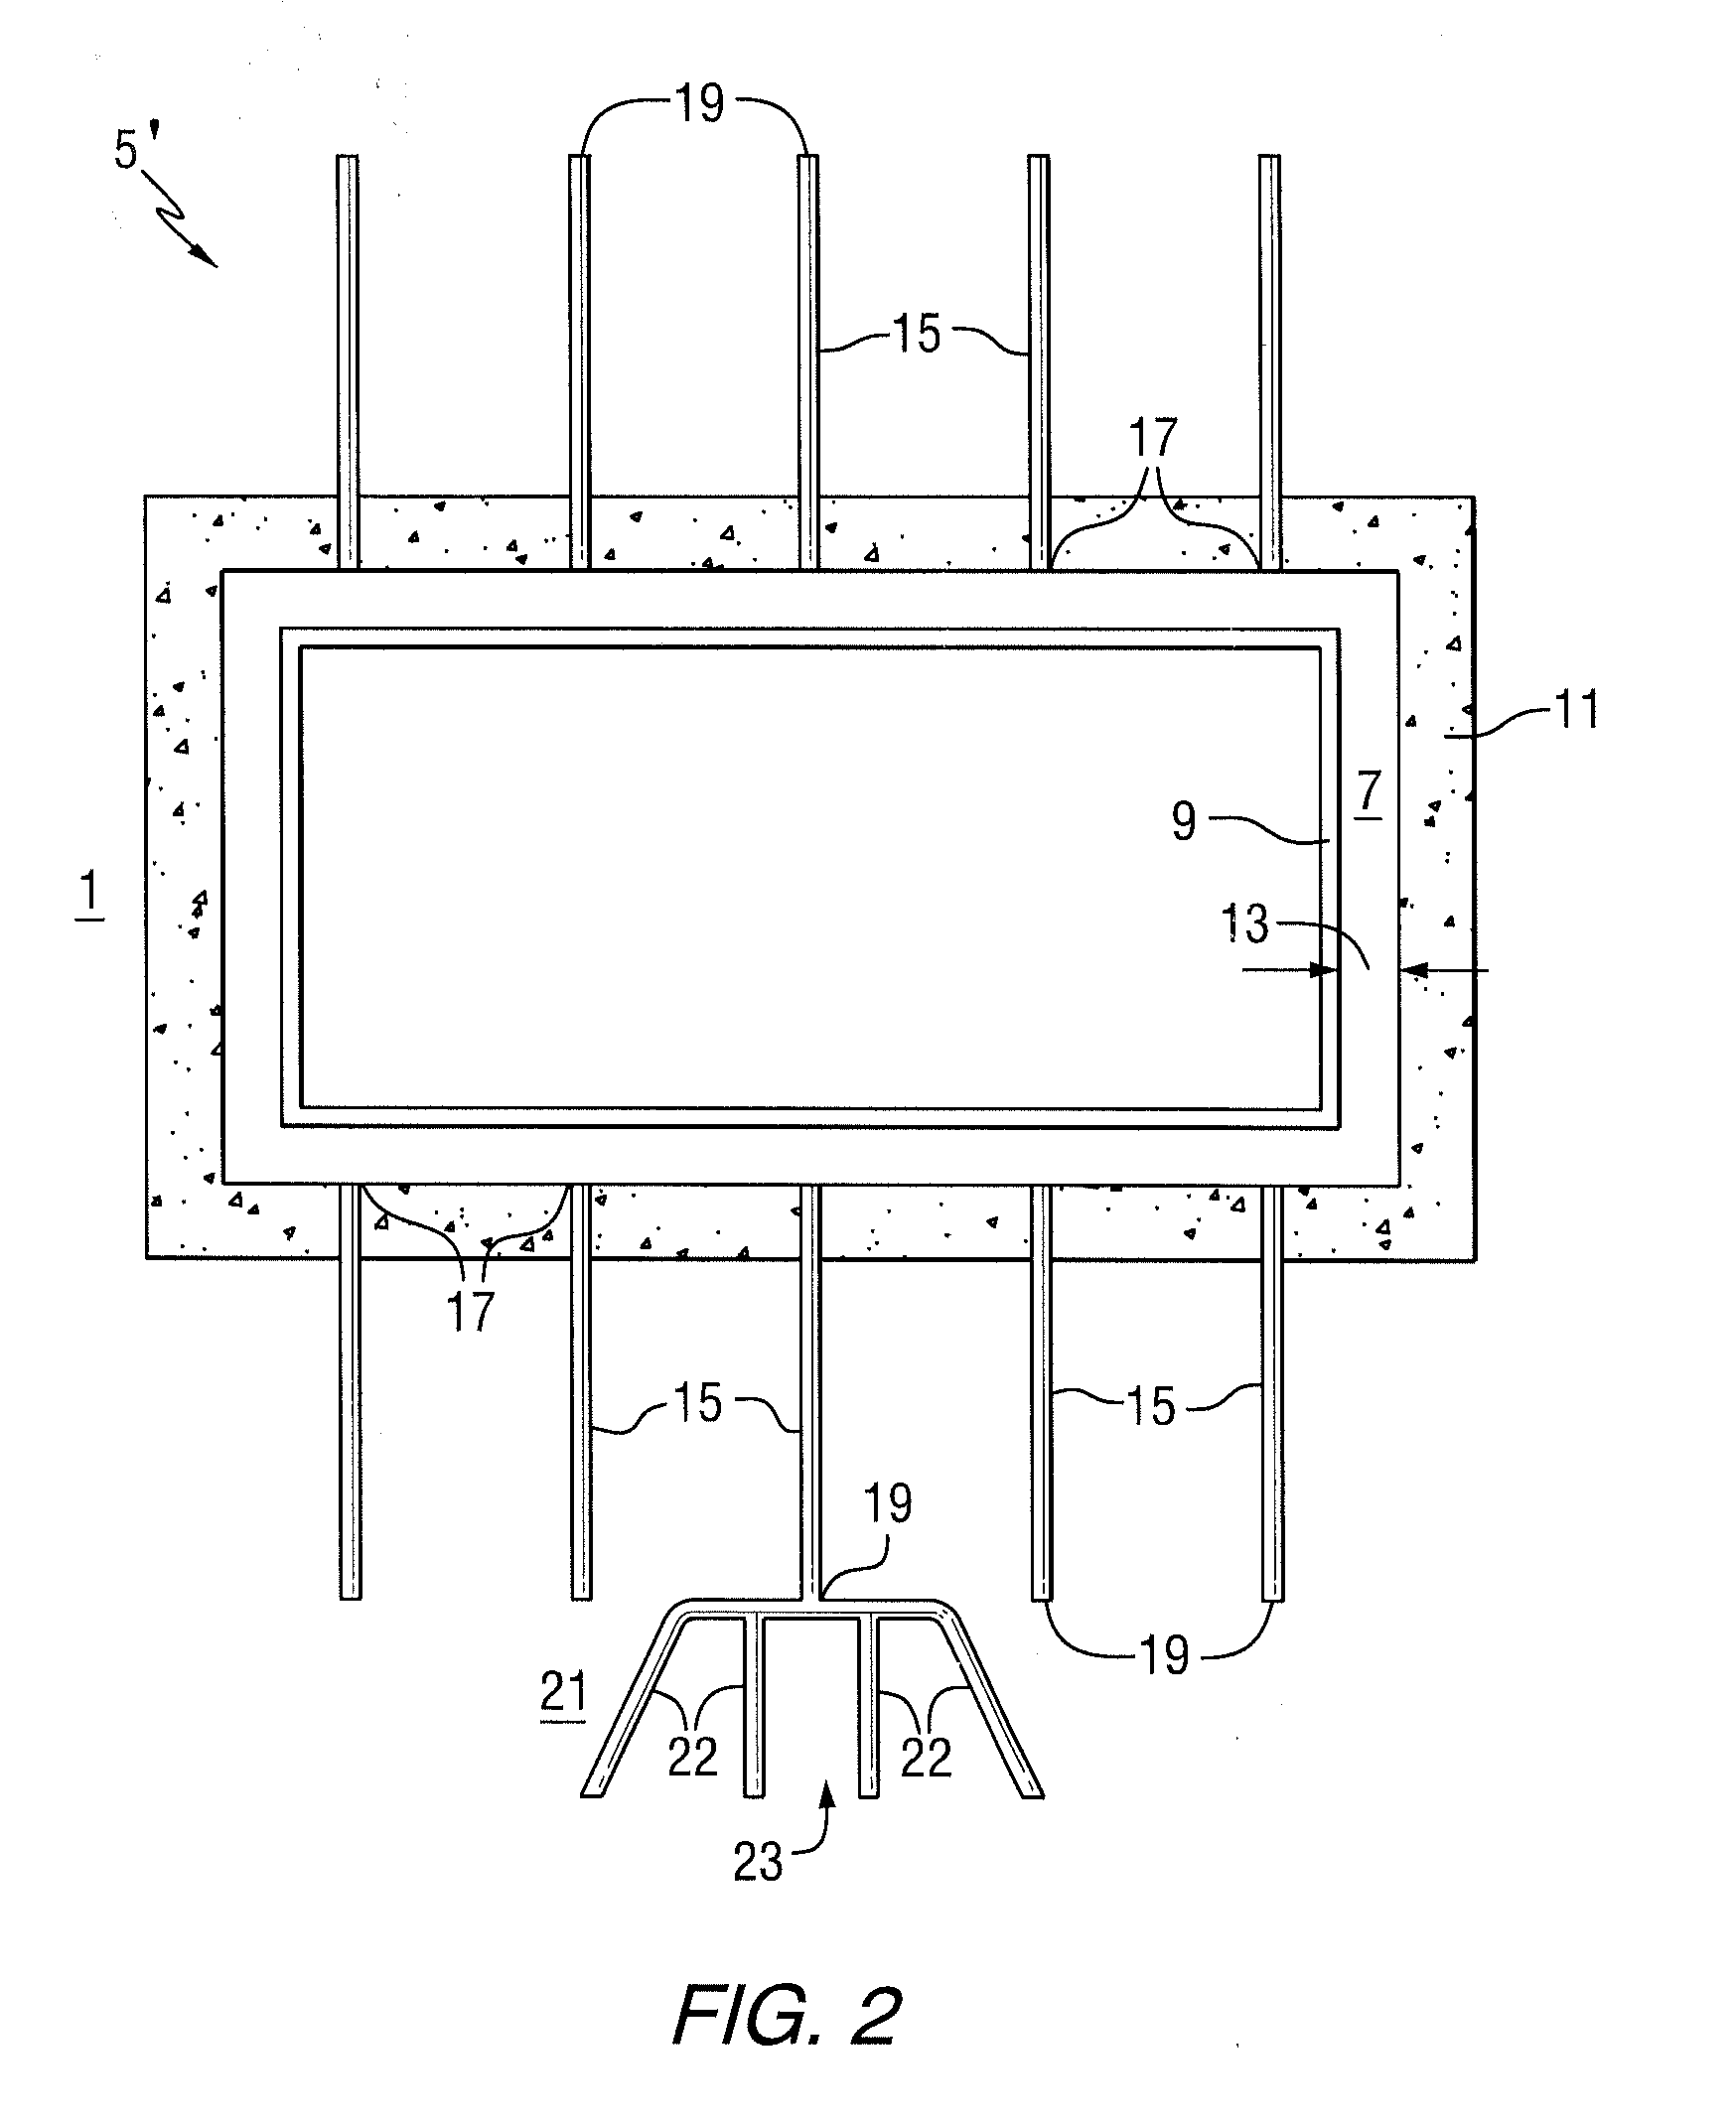 Alternate passive spent fuel pool cooling systems and methods